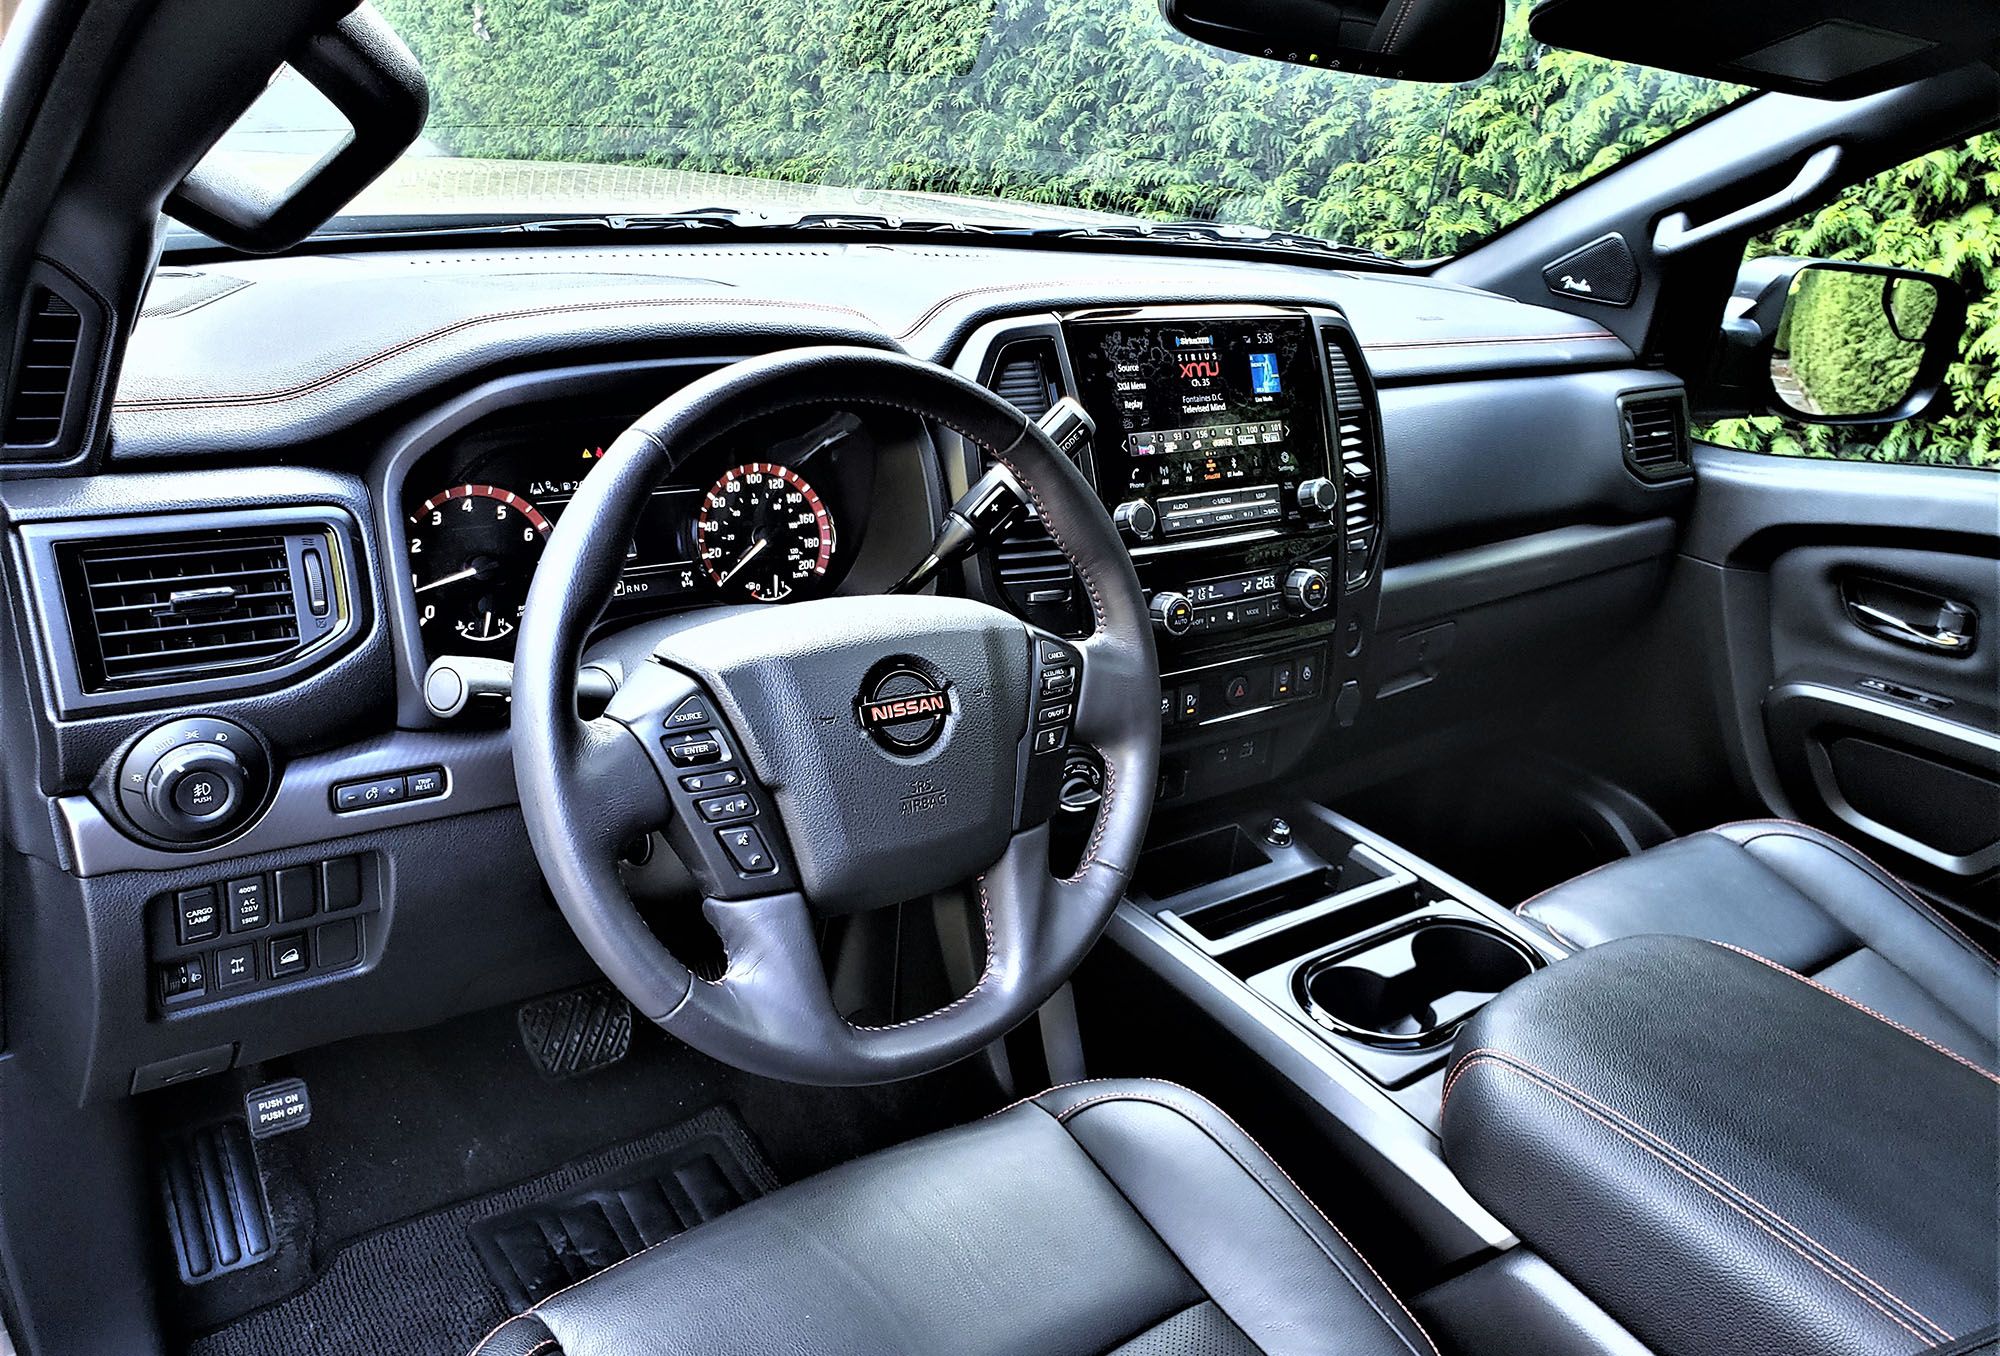 2022 Nissan Titan Crew Cab PRO 4X Luxury interior shows this truck is targeting the consumer market.